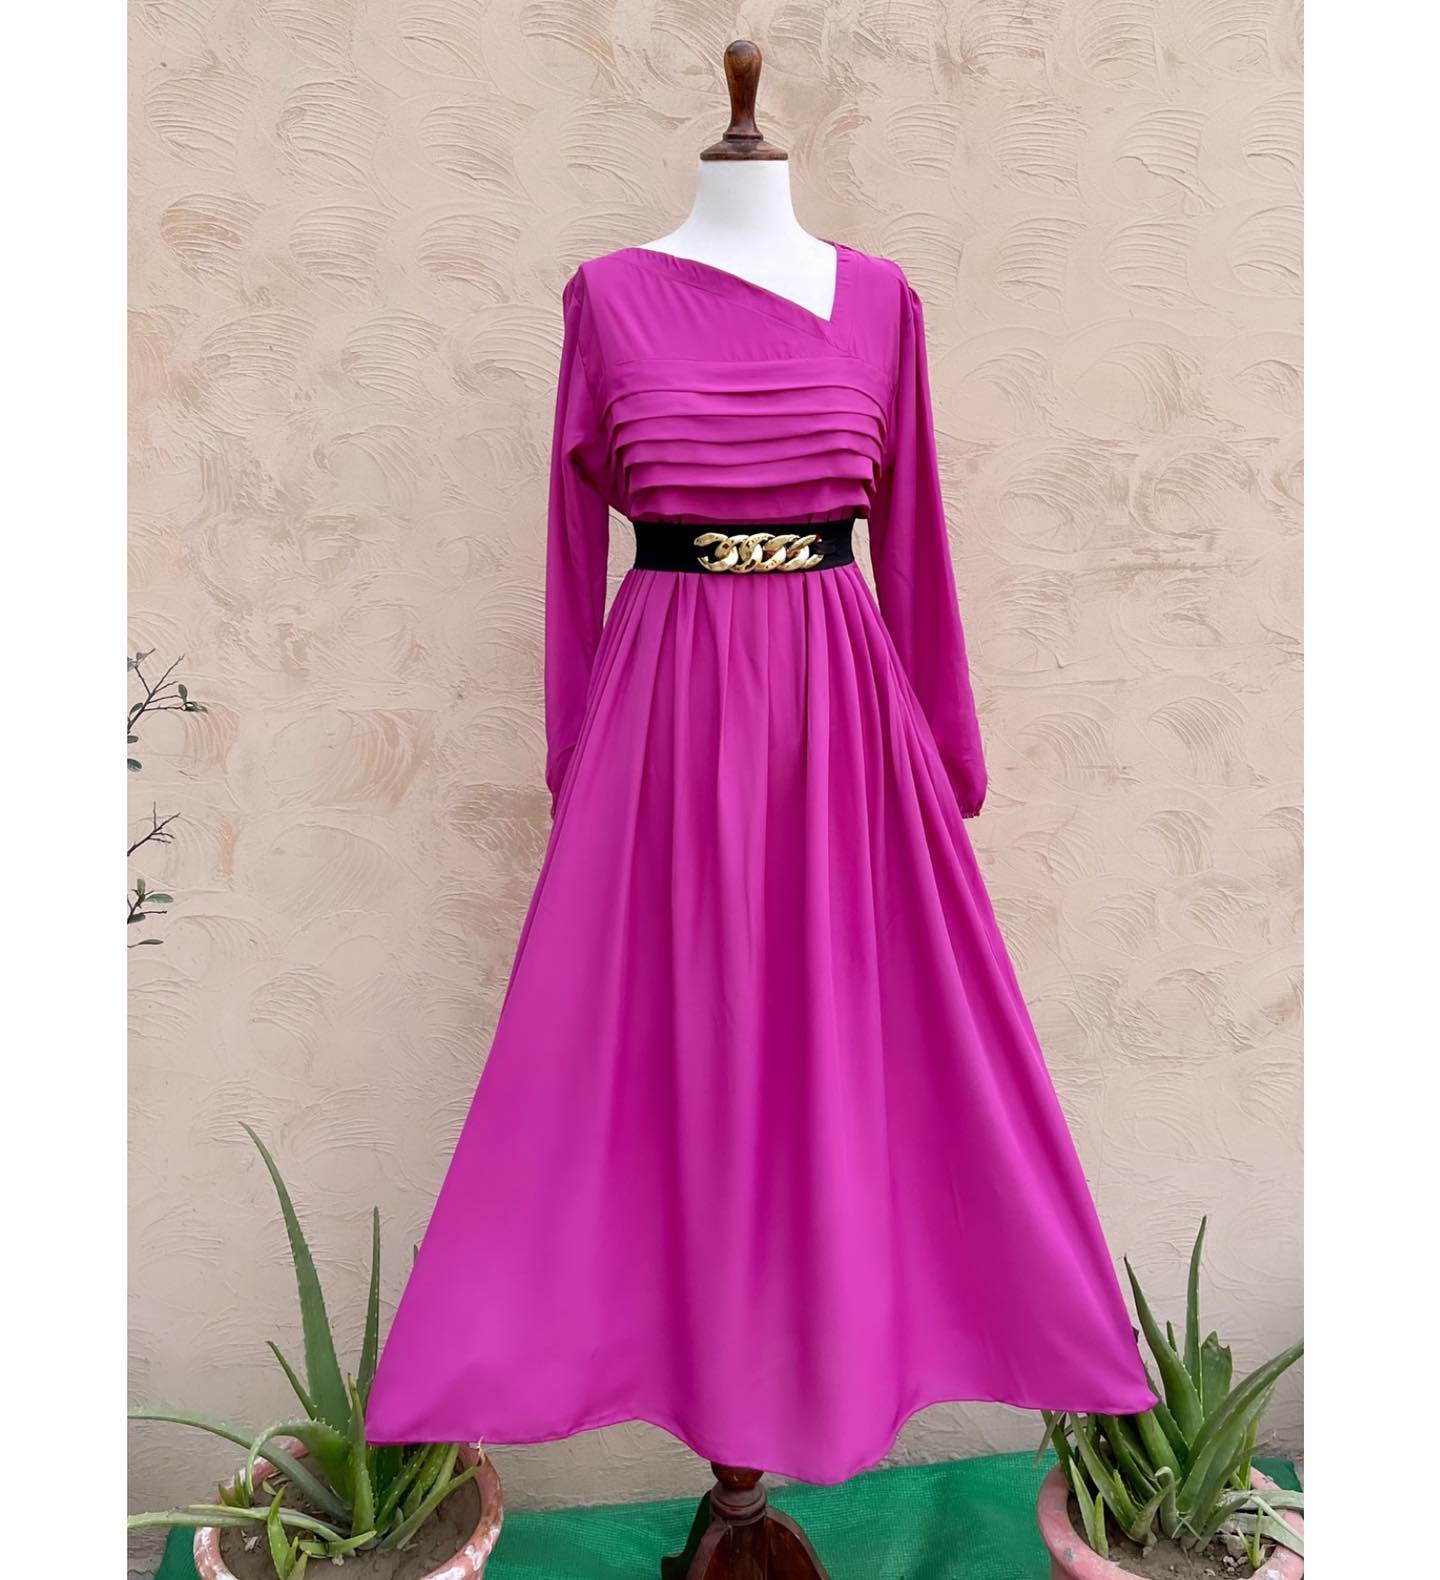 Plated Body Style Frock with Chain Belt